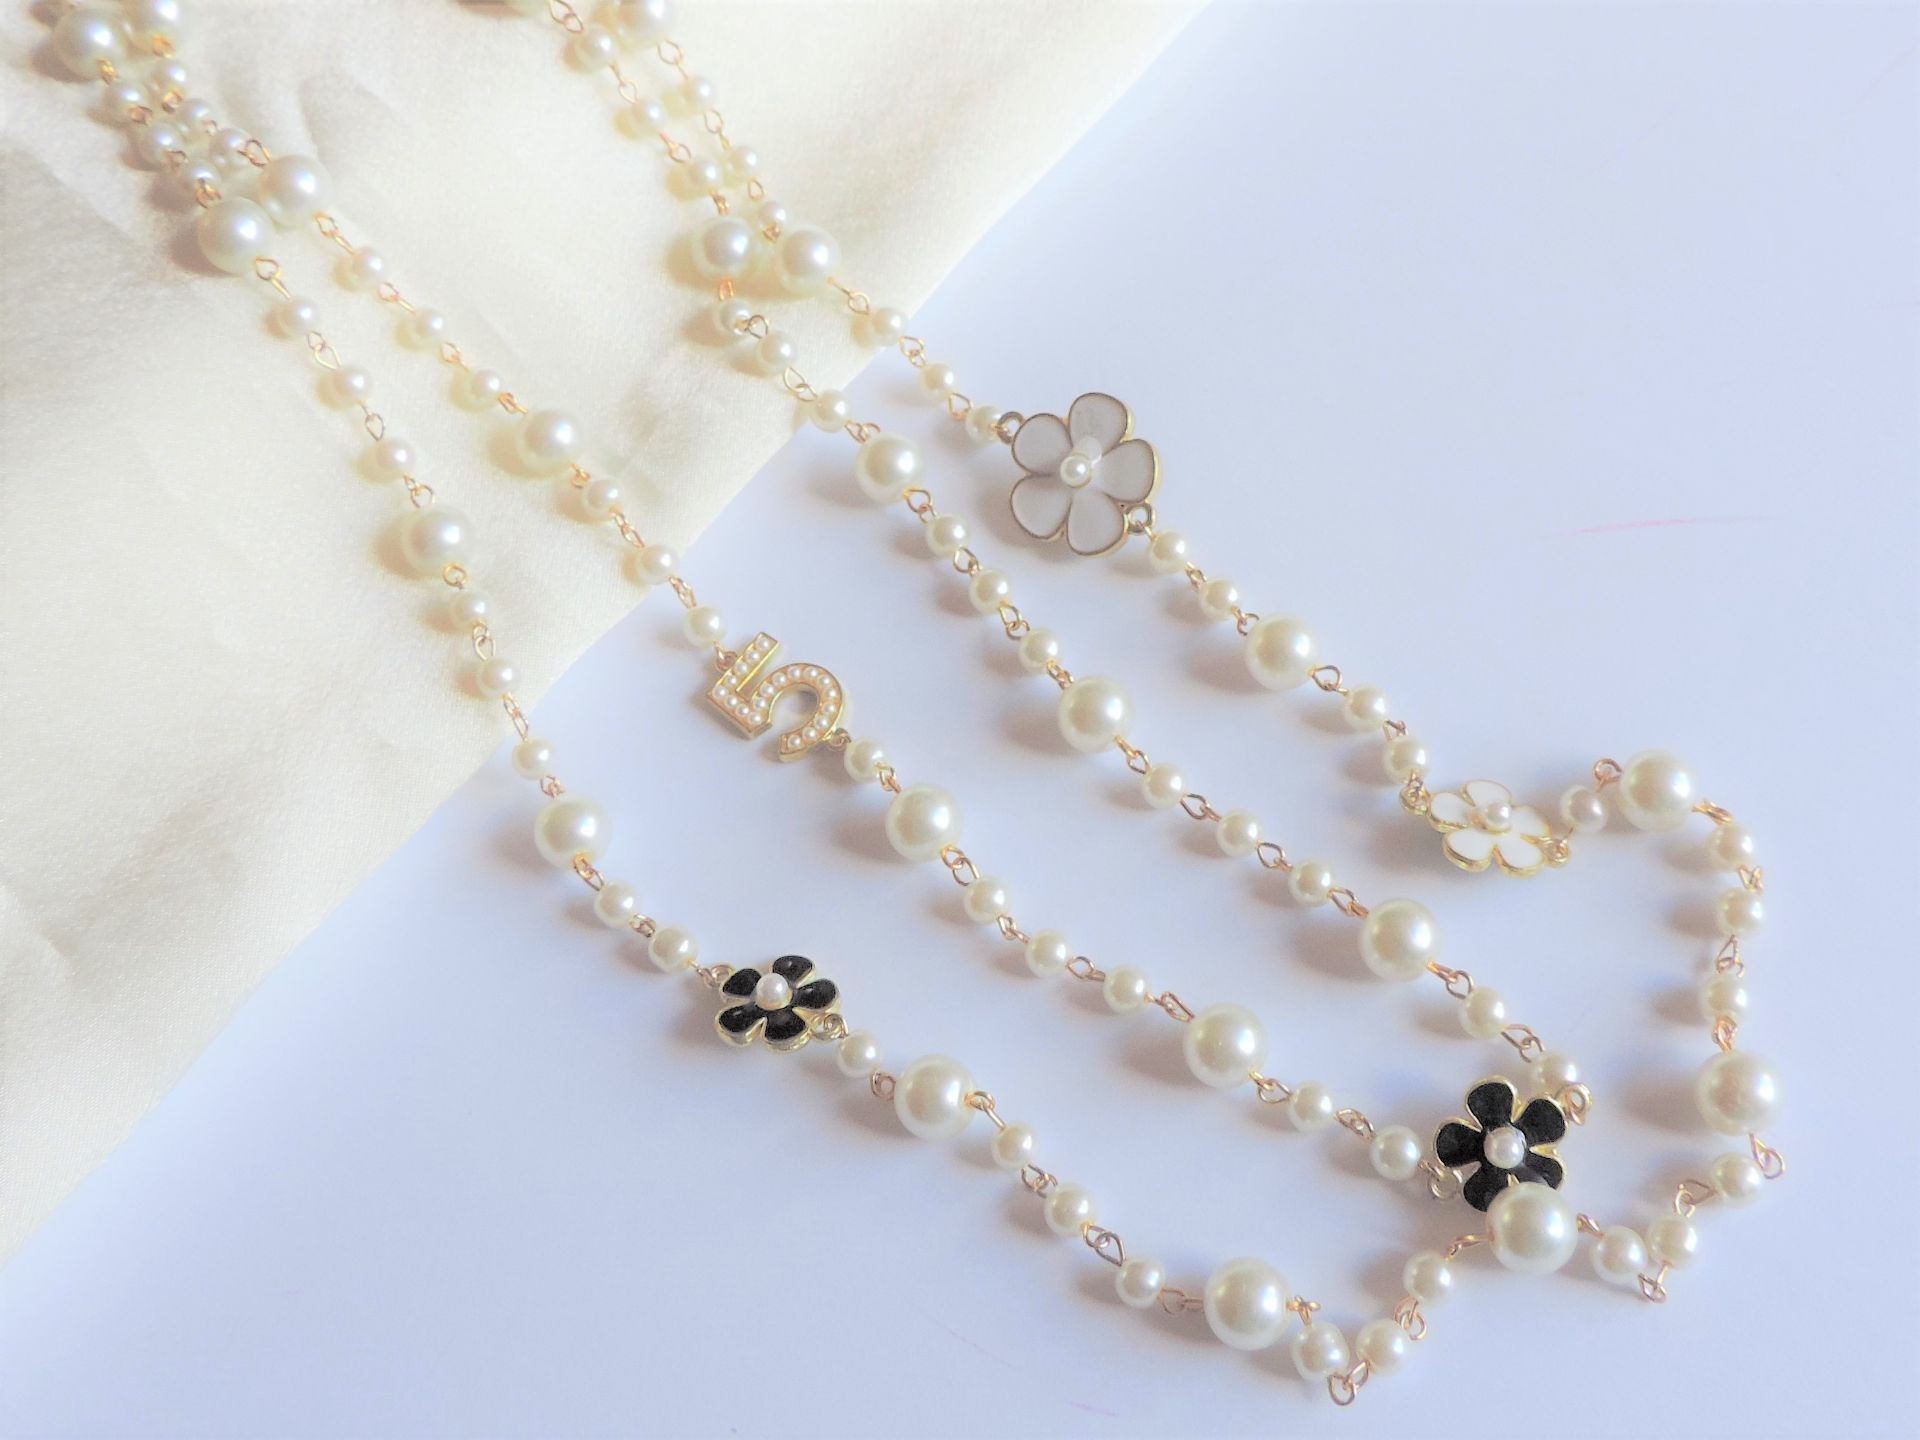 28 inch Pearl and Enamel No.5 Necklace - Image 2 of 4